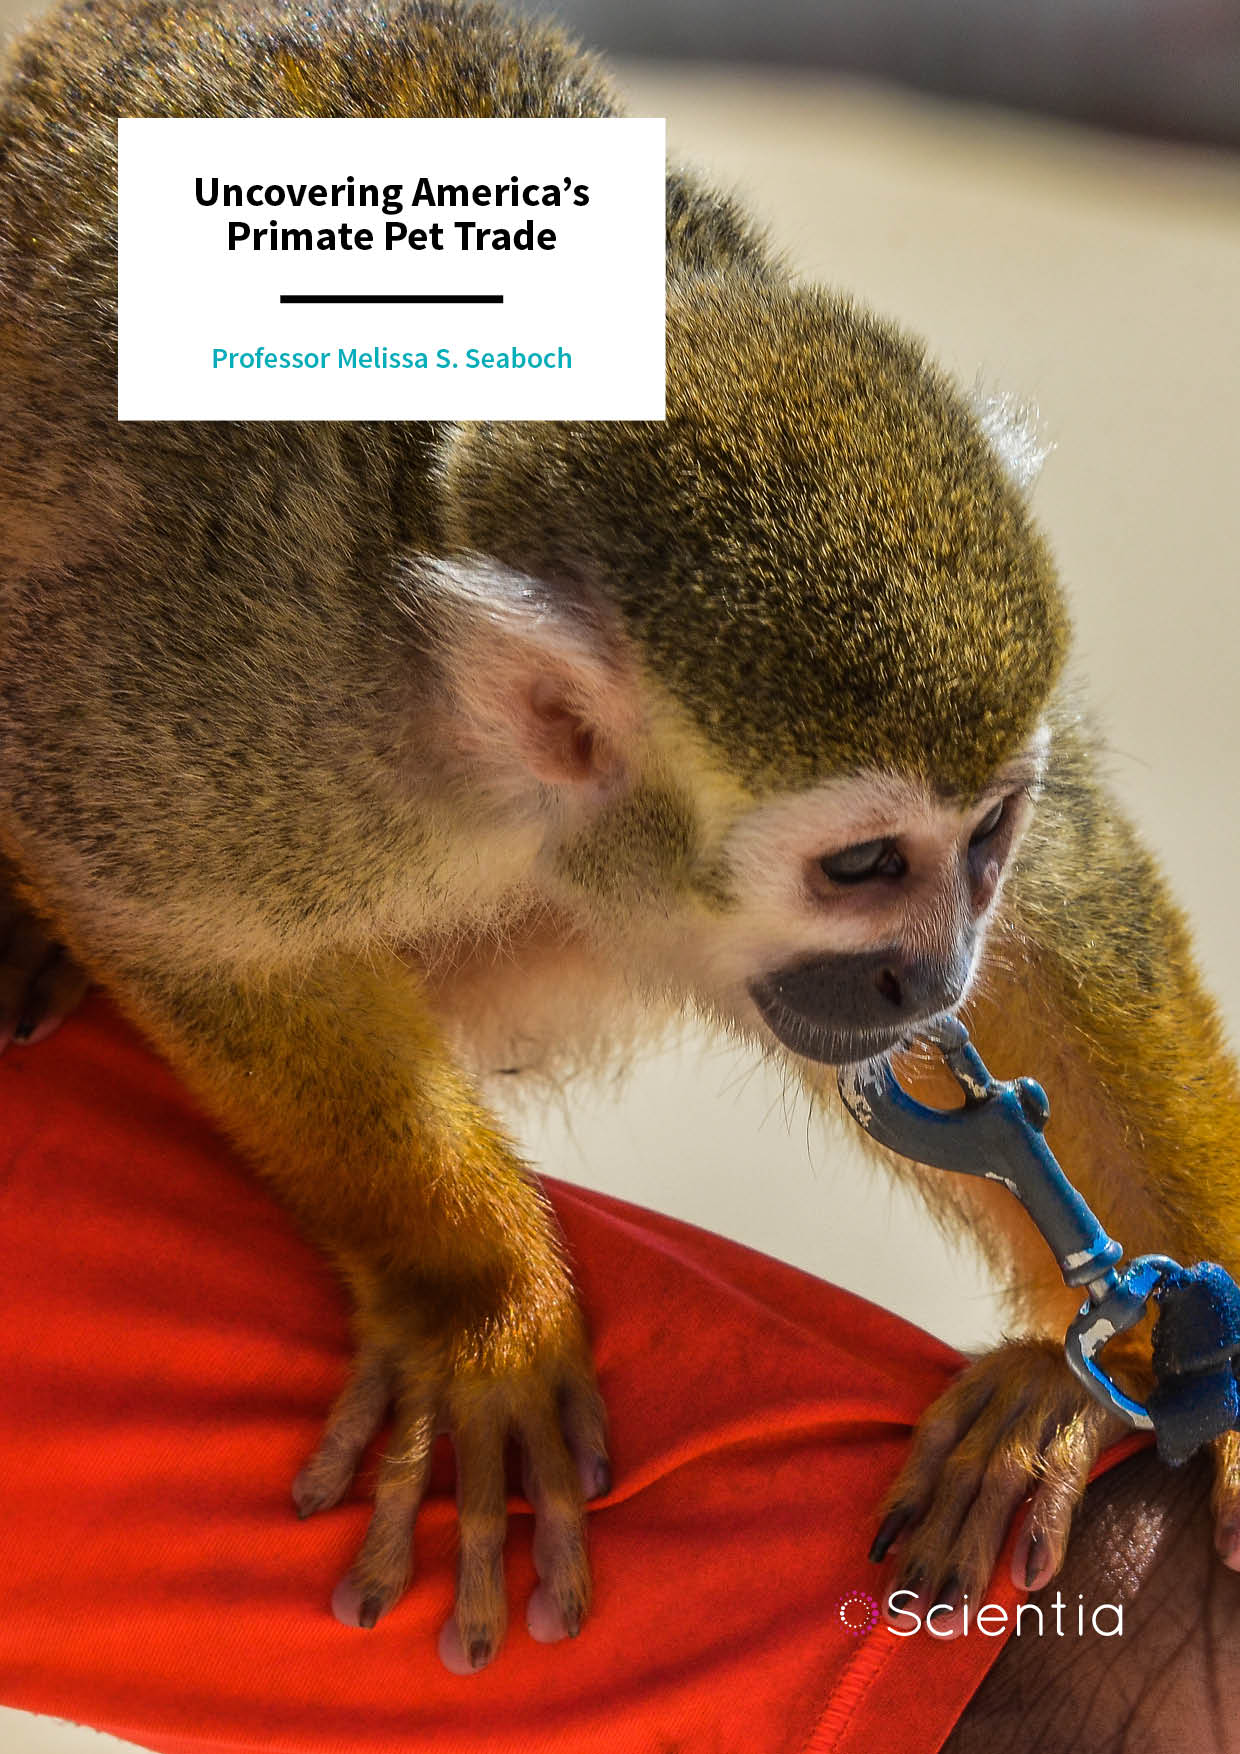 Dr. Melissa Seaboch | Uncovering America’s Primate Pet Trade